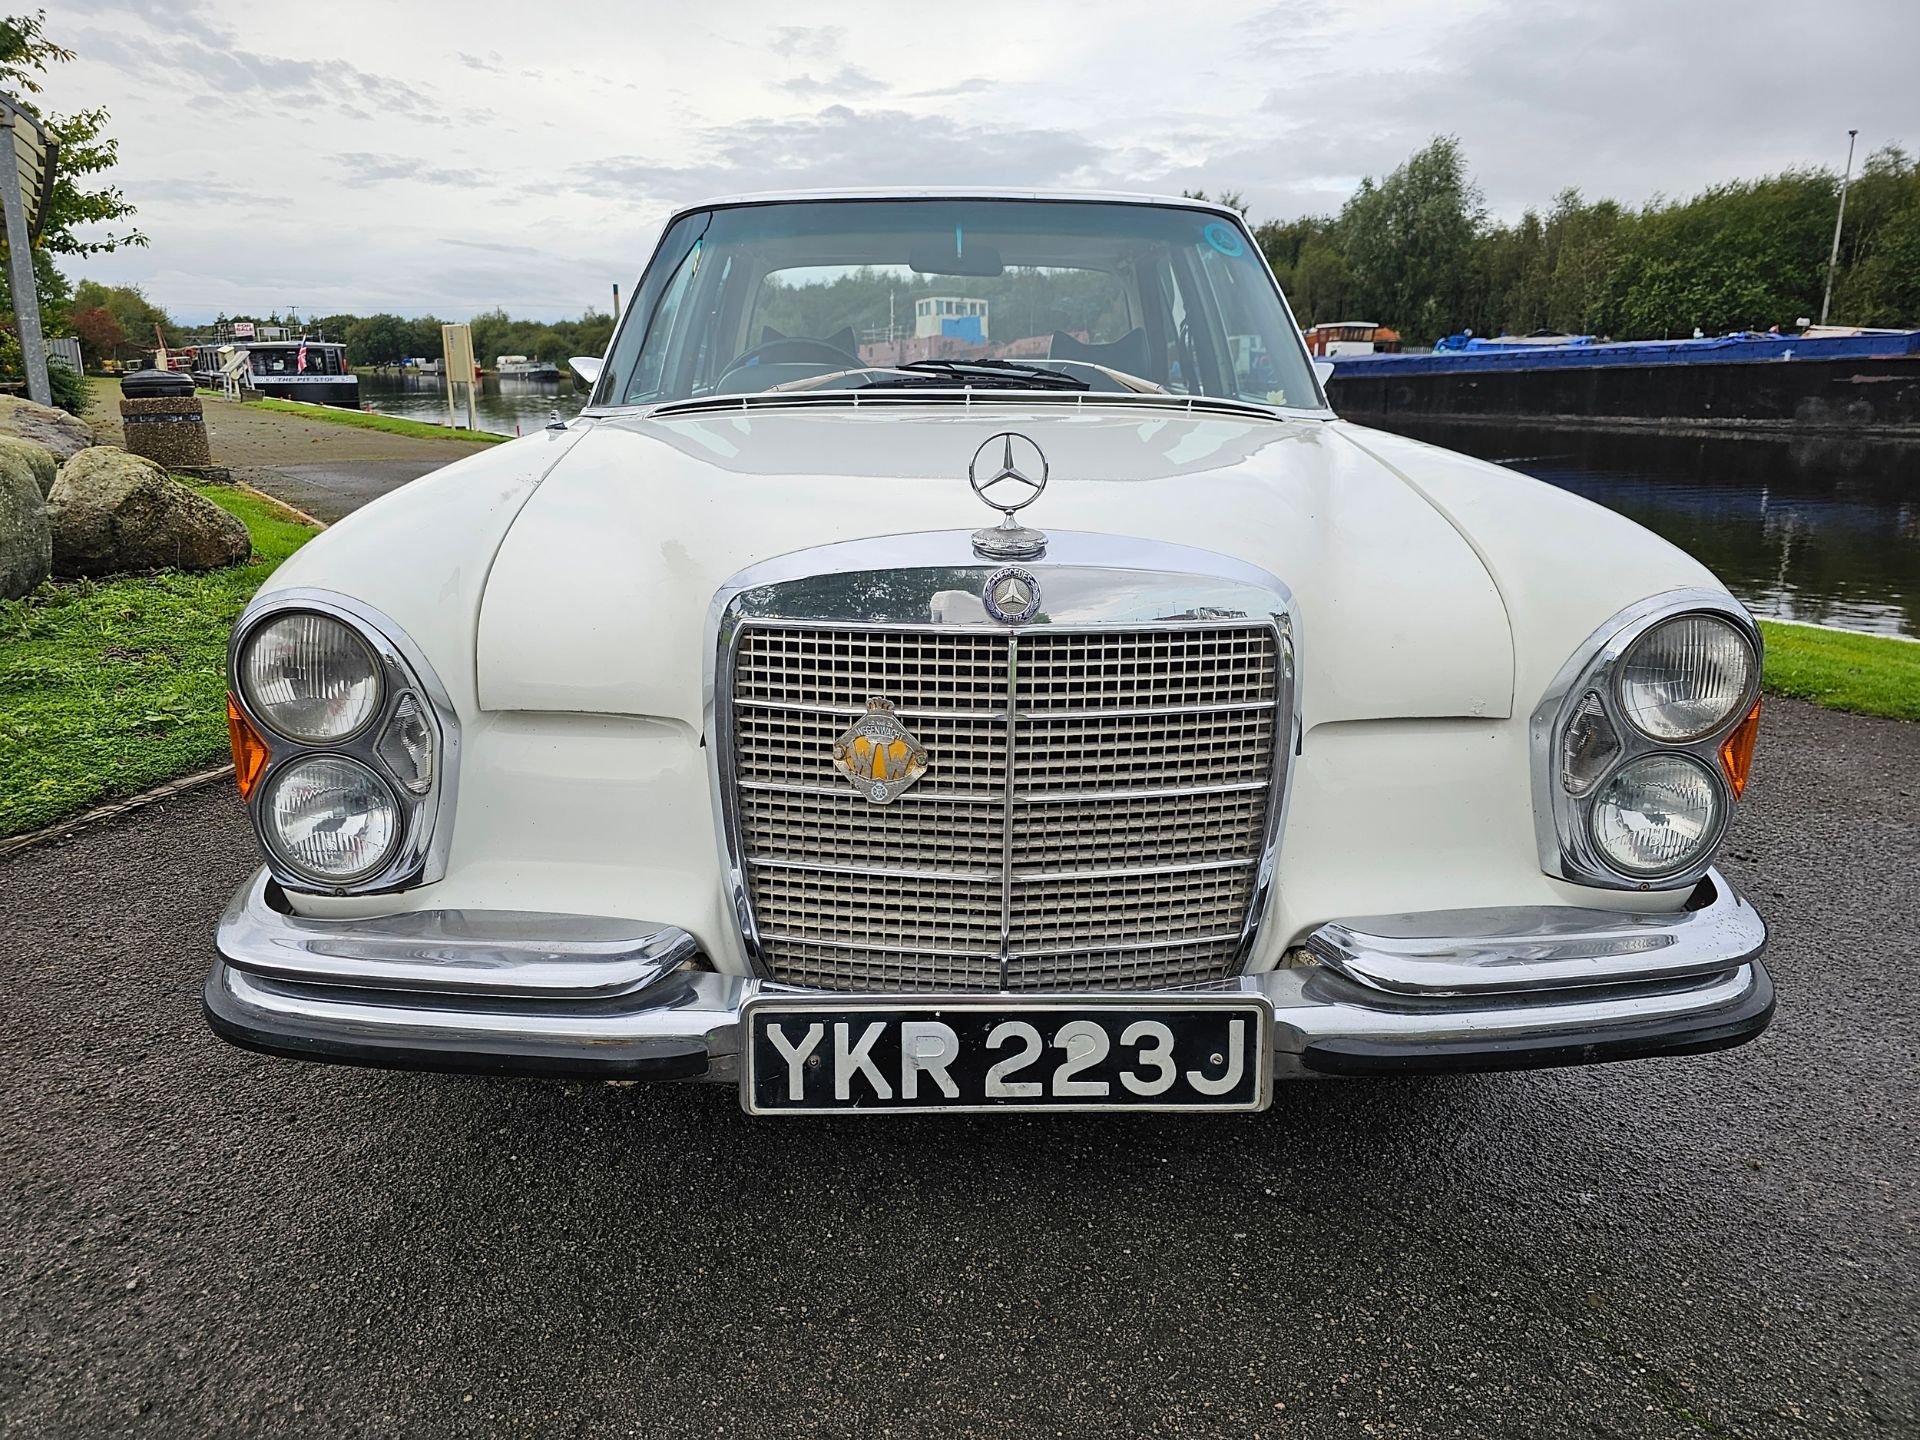 1971 Mercedes Benz W108 280SE, 2,778cc, automatic. Registration number YKR 223J. Chassis number - Image 3 of 24